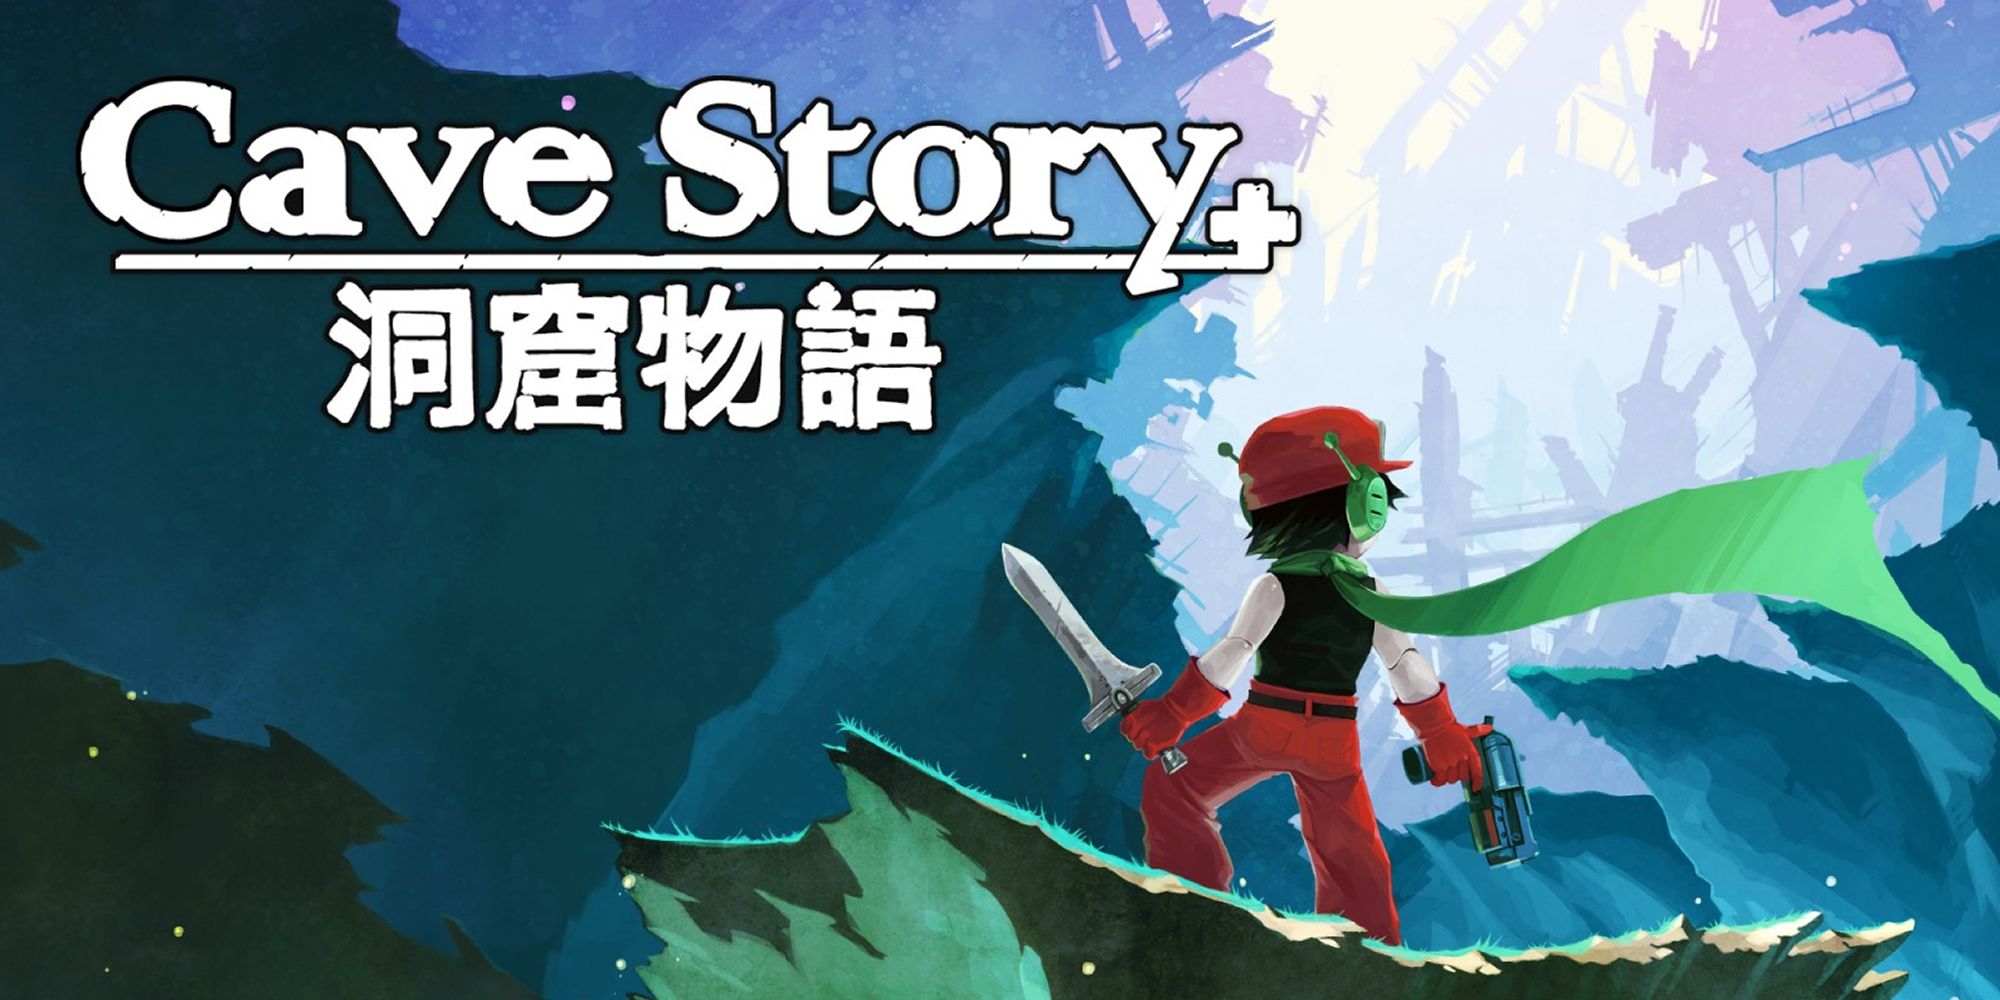 Title of the cave story